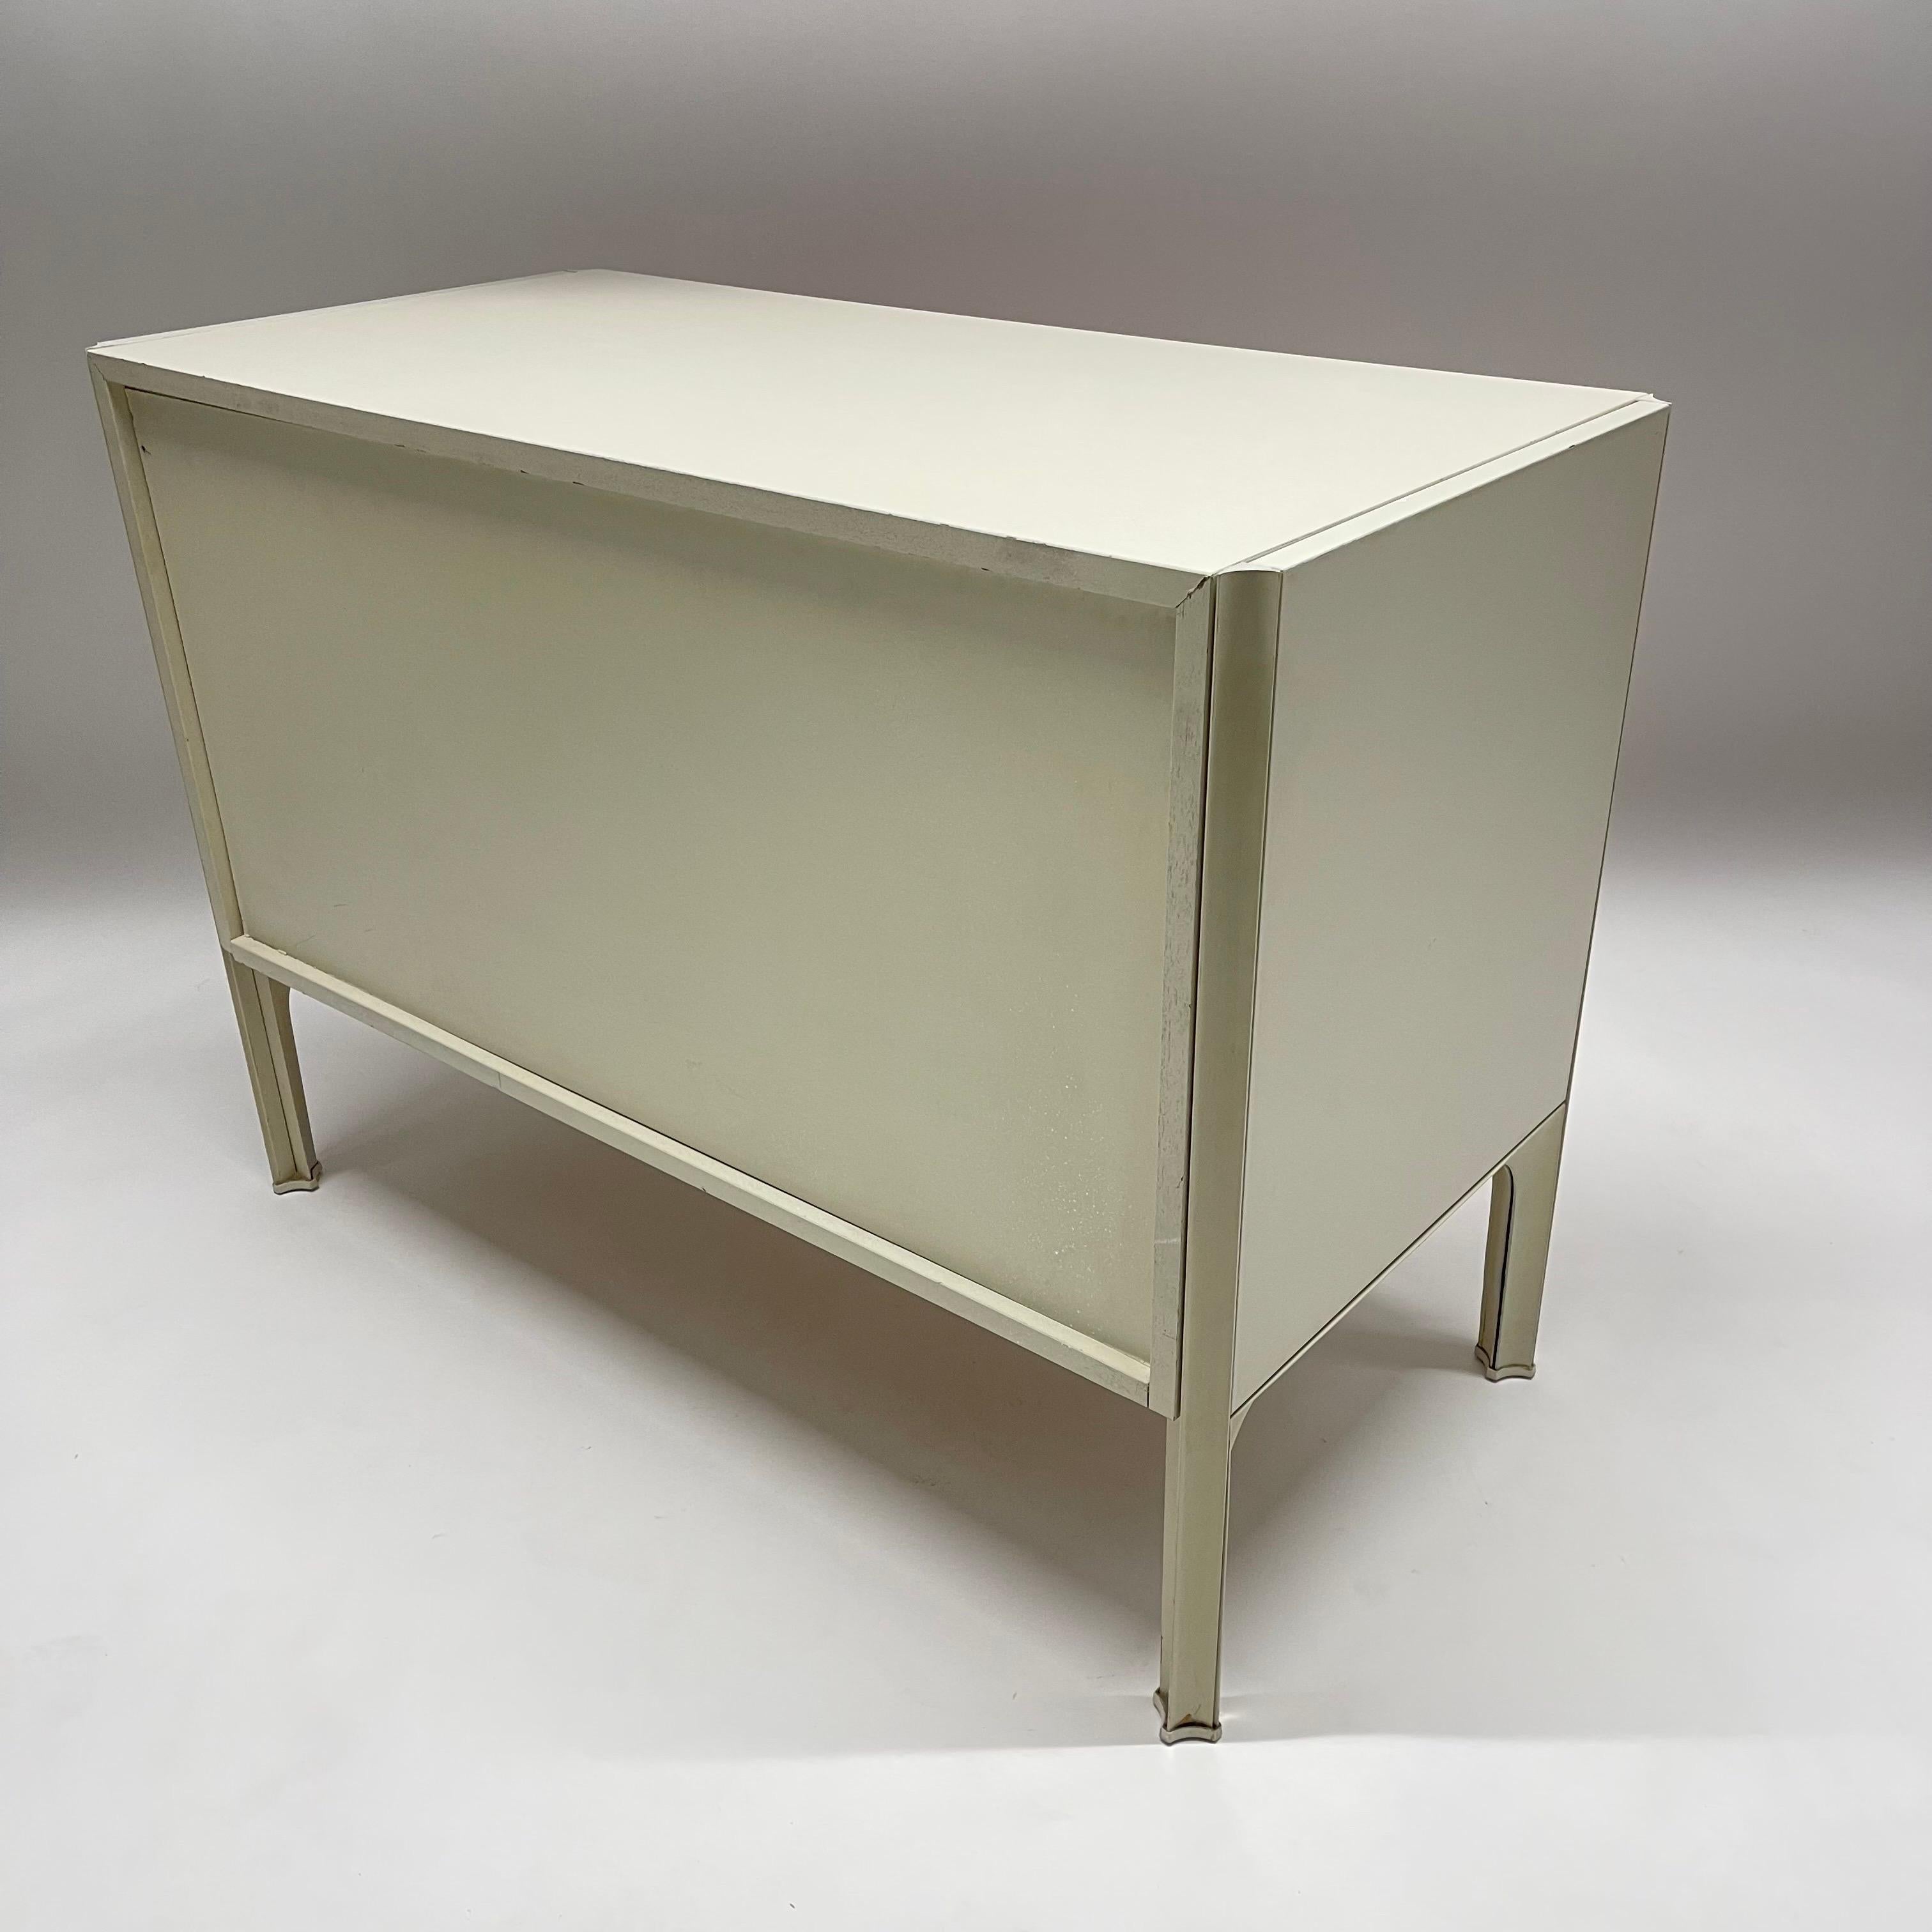 20th Century Raymond Loewy DF-2000 Commode, Chest of Drawers, or Dresser, France, circa 1968